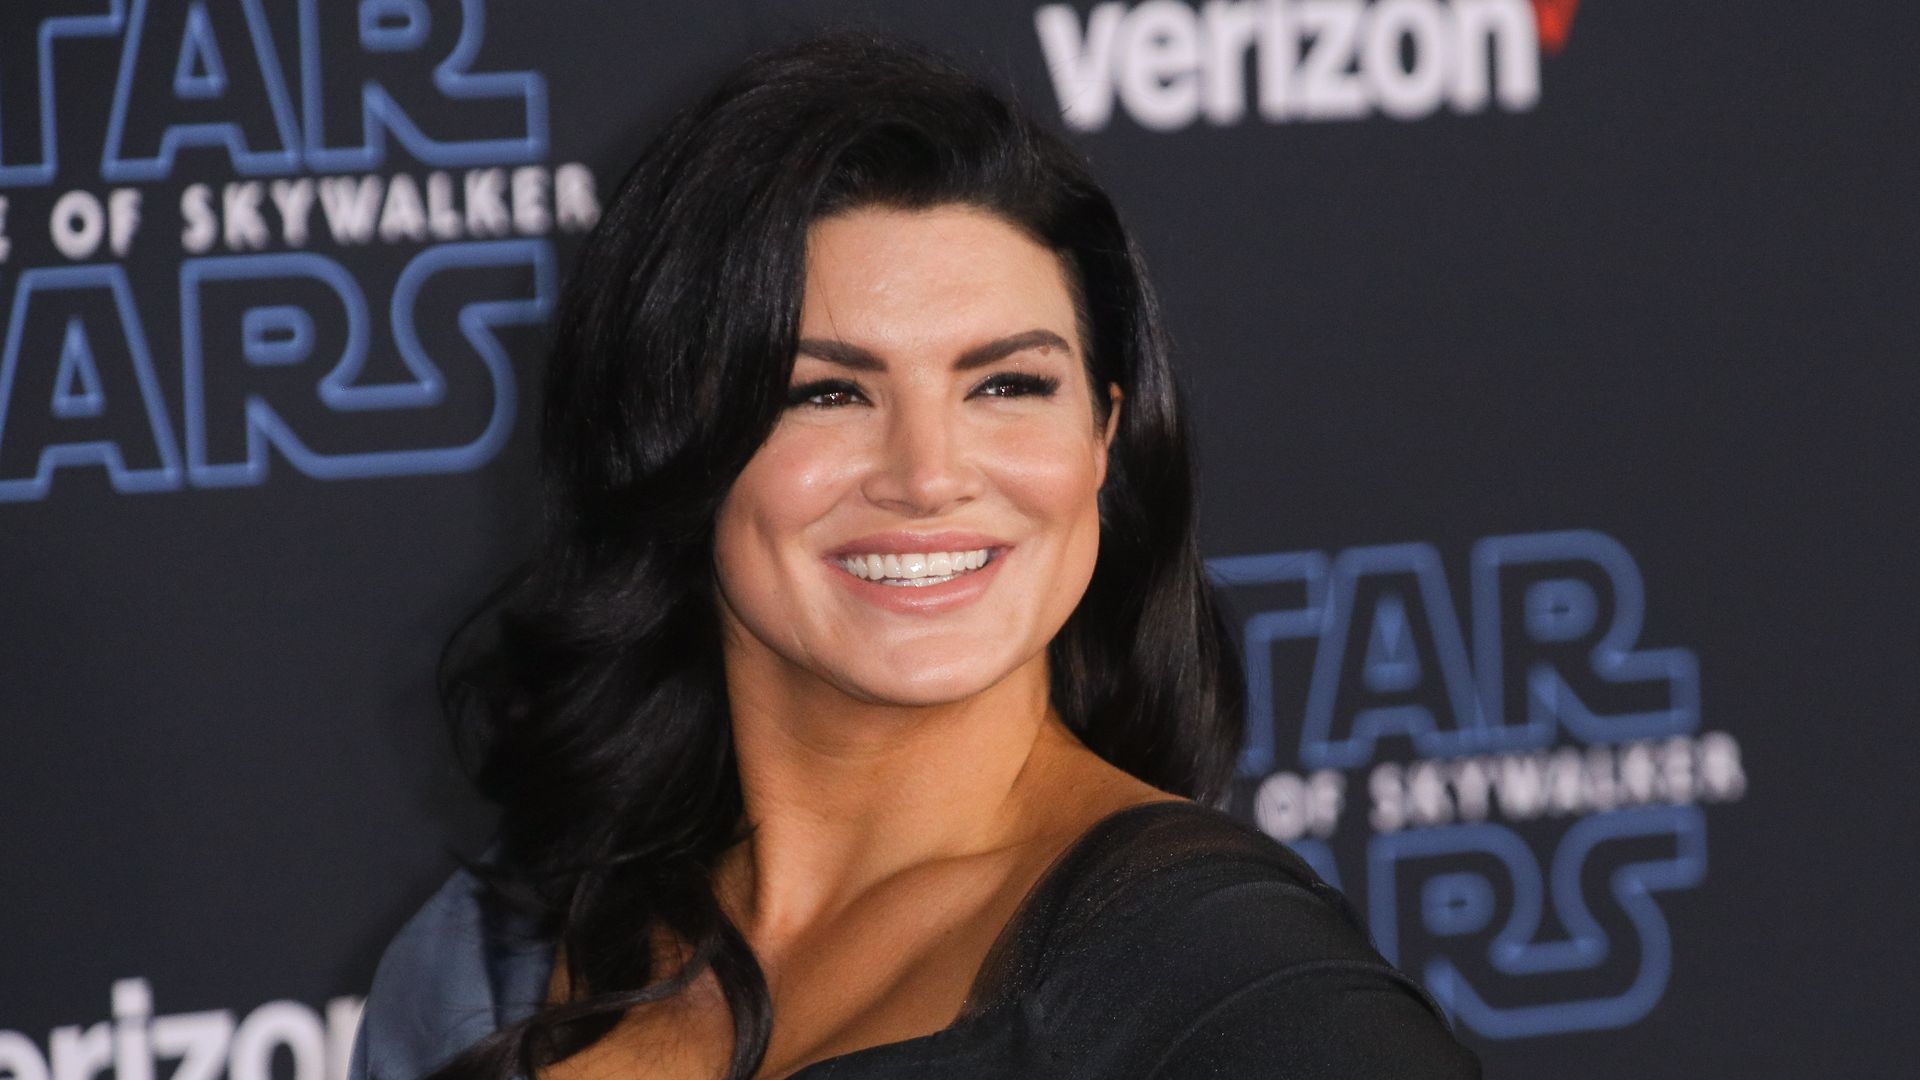 7 stars who were blacklisted from Hollywood: Gina Carano, Brendan Fraser, Katherine Heigl and more